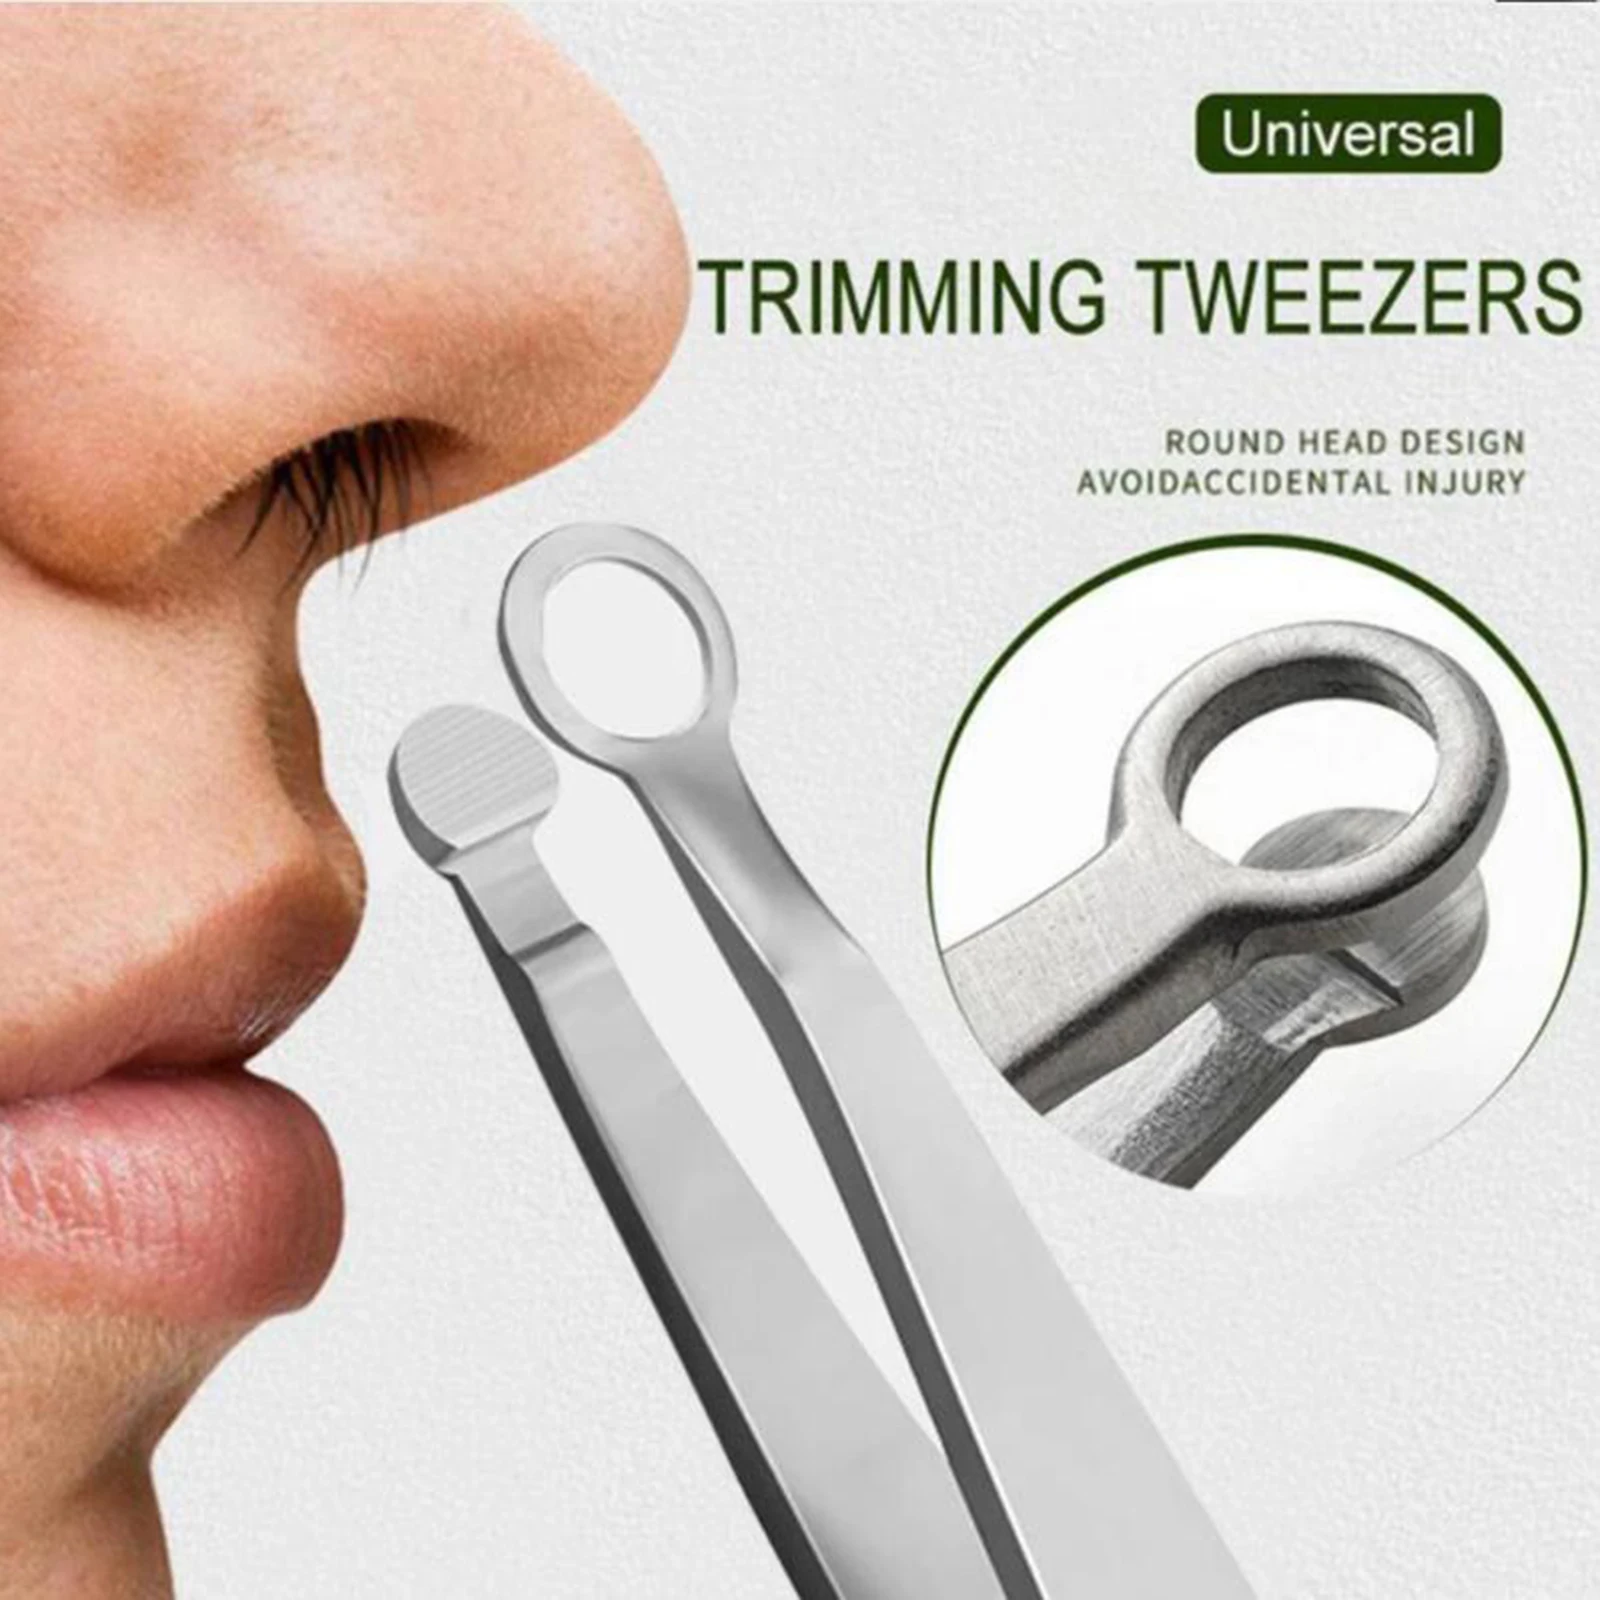 Universal Nose Hair Trimming Tweezers Safe Face Hair Trimmer Makeup Tools Durable for Long Time Use